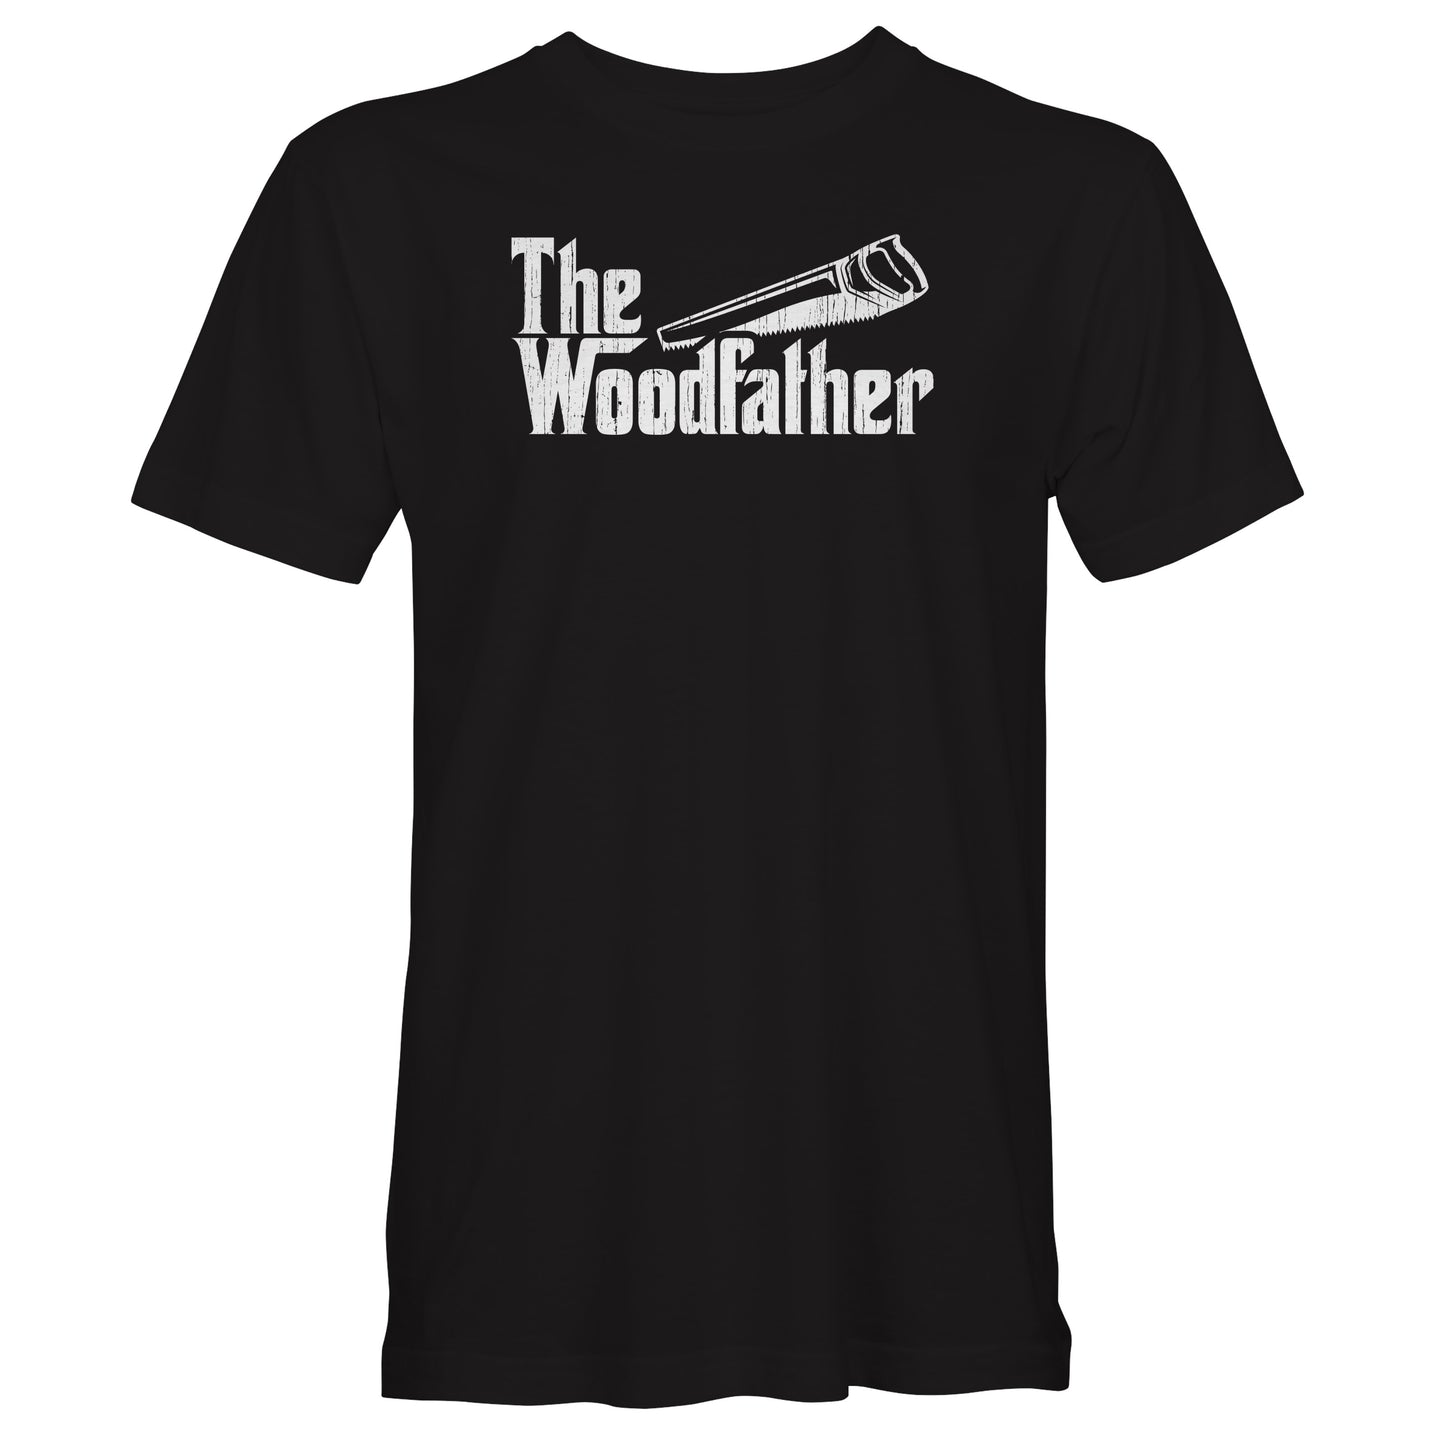 Funny Carpenter T-Shirt, Woodfather Parody Gift Idea, Humorous Woodworking Joiner Tee Shirt T Top, Handsaw